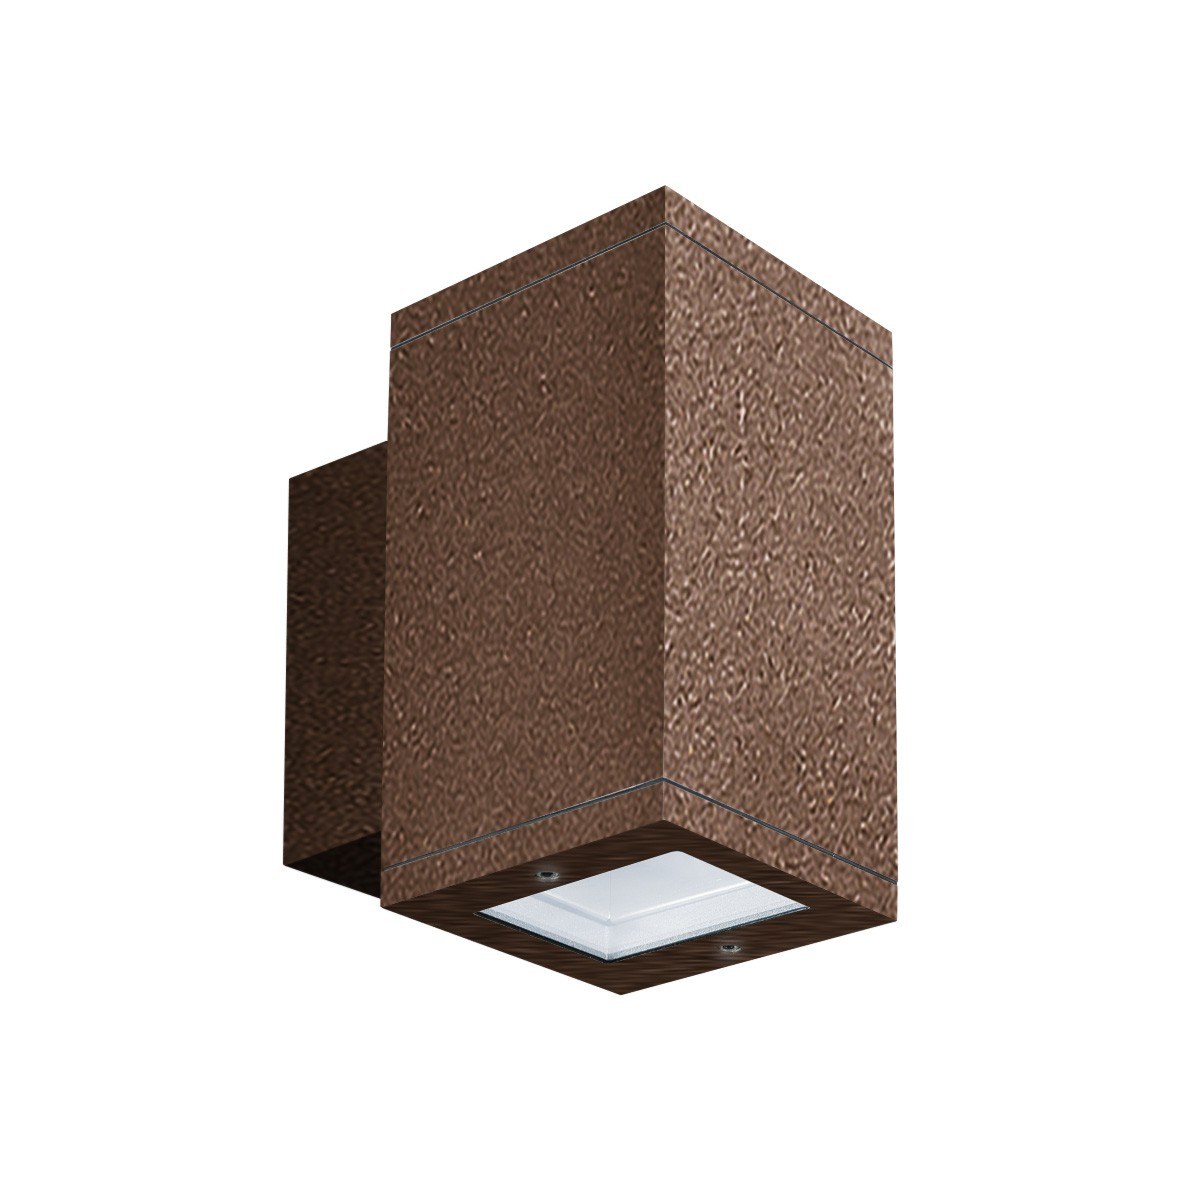 AVERY – LED WALL LAMPLED SQUARED 15,6W 3K MA